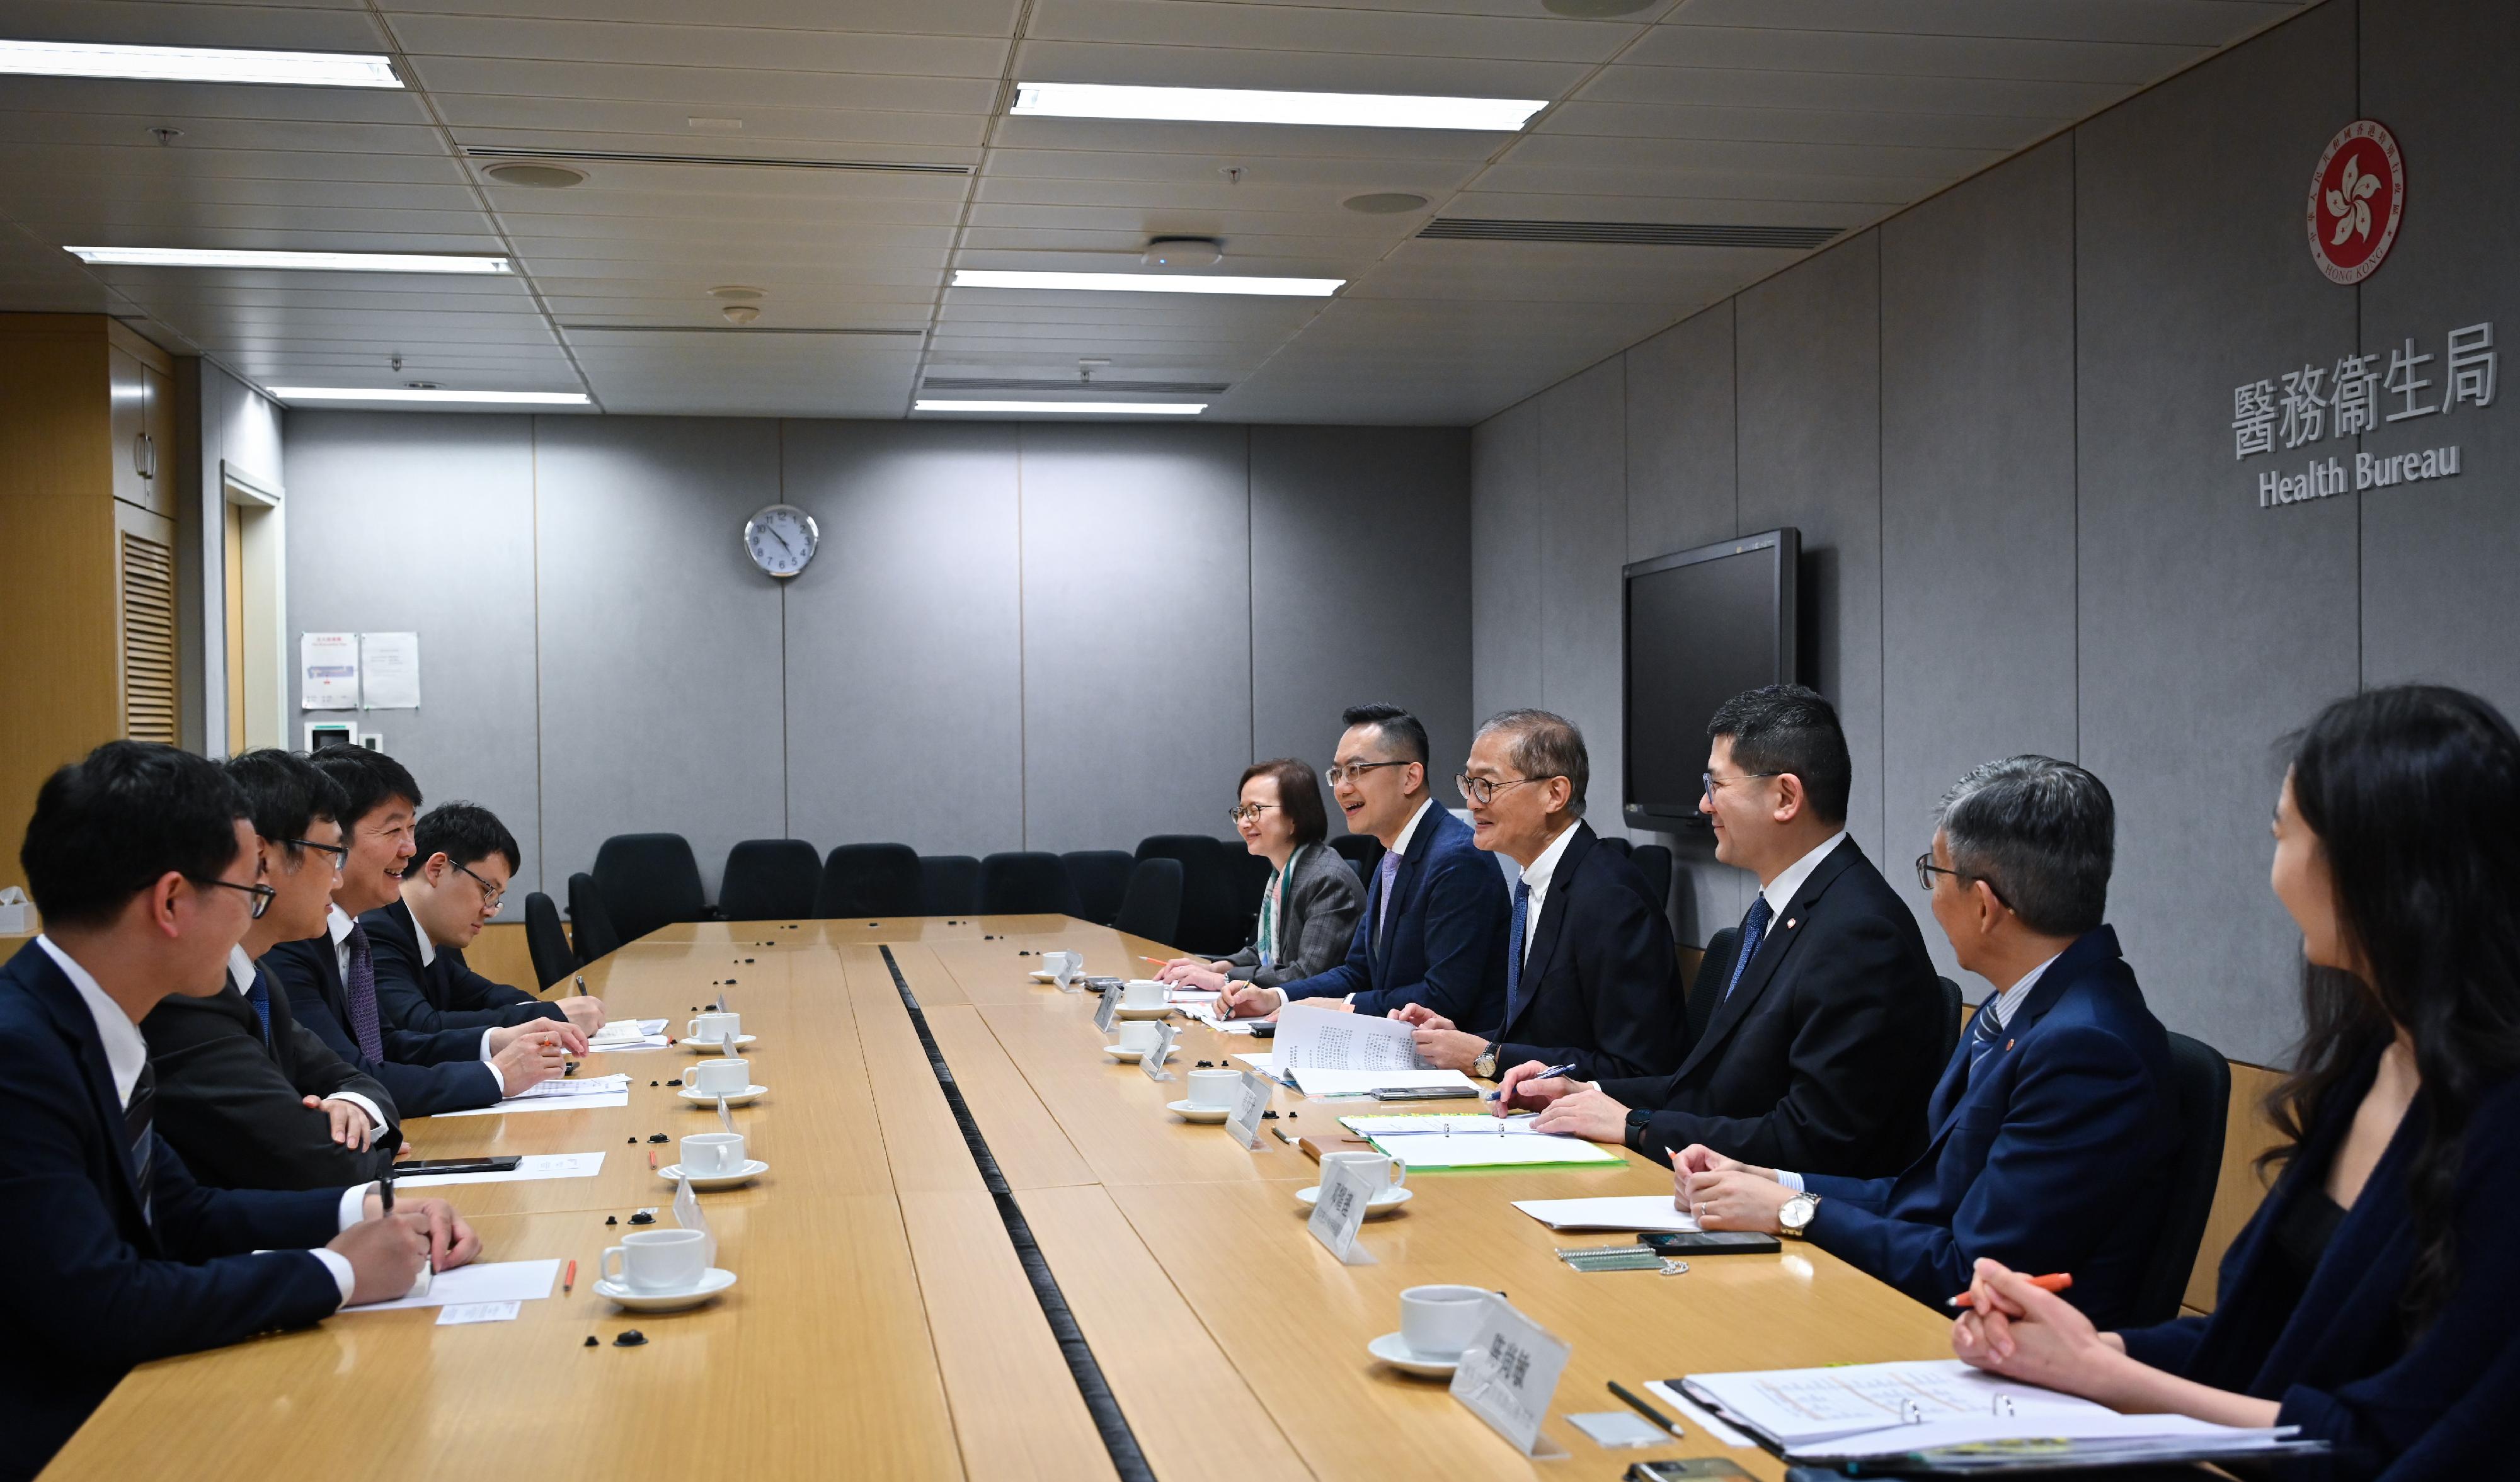 The Secretary for Health, Professor Lo Chung-mau (fourth right), meets Deputy Director of the Shanghai Municipal Health Commission Mr Yu Tao (third left), and his delegation today (May 17) to explore ways of strengthening co-operation in the area of healthcare, with the Director of Health, Dr Ronald Lam (fifth right), and the Chief Executive of the Hospital Authority, Dr Tony Ko (third right), in attendance.